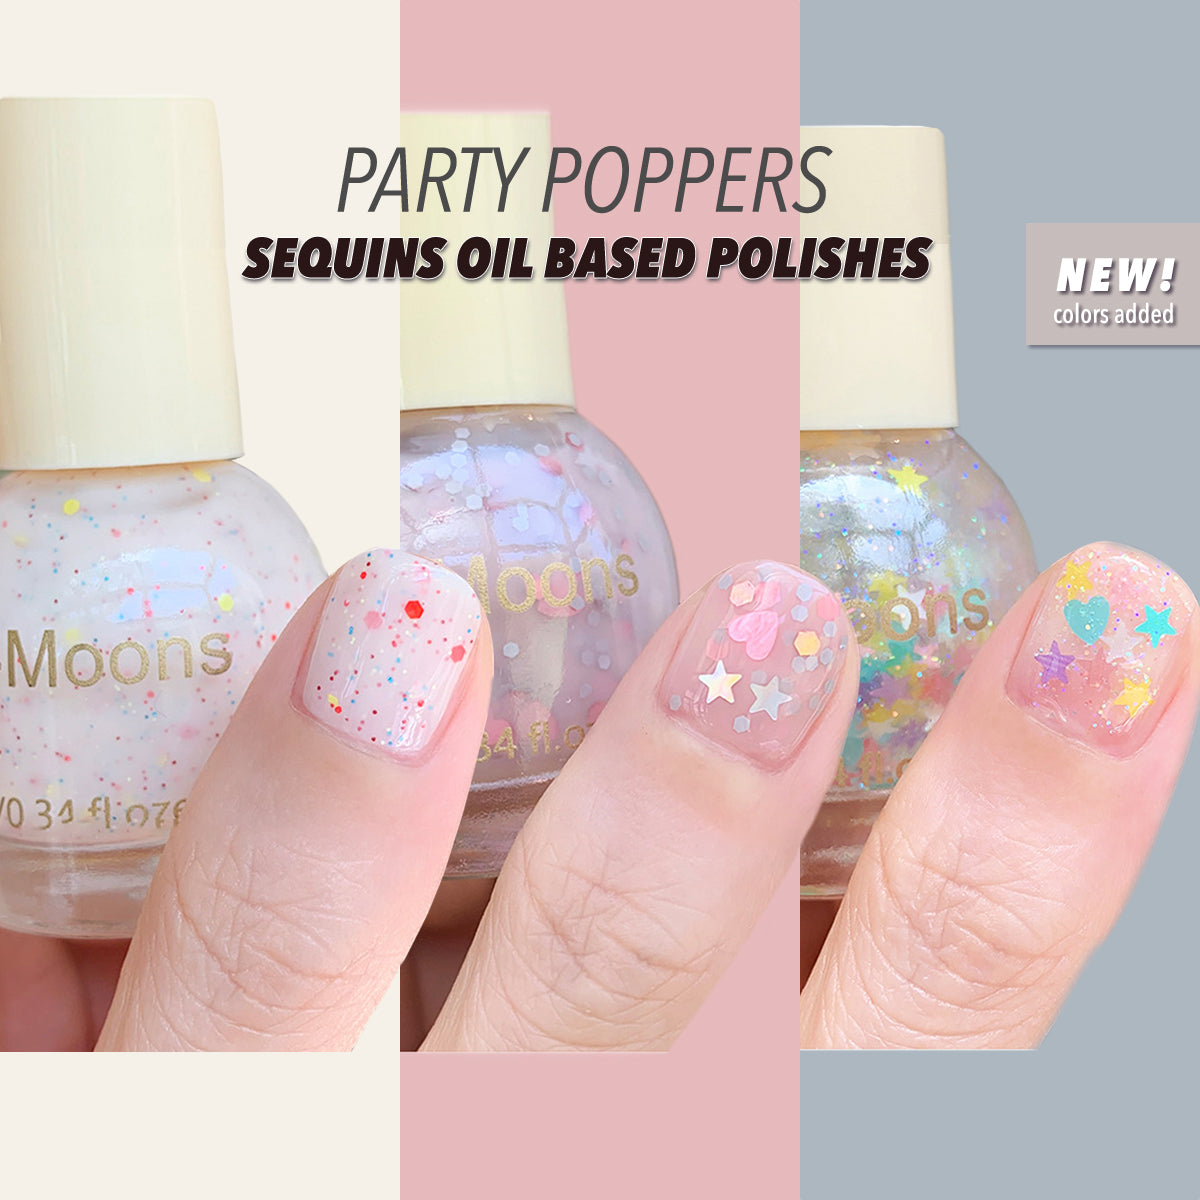 TwoMoons Party Poppers Sequins Cover